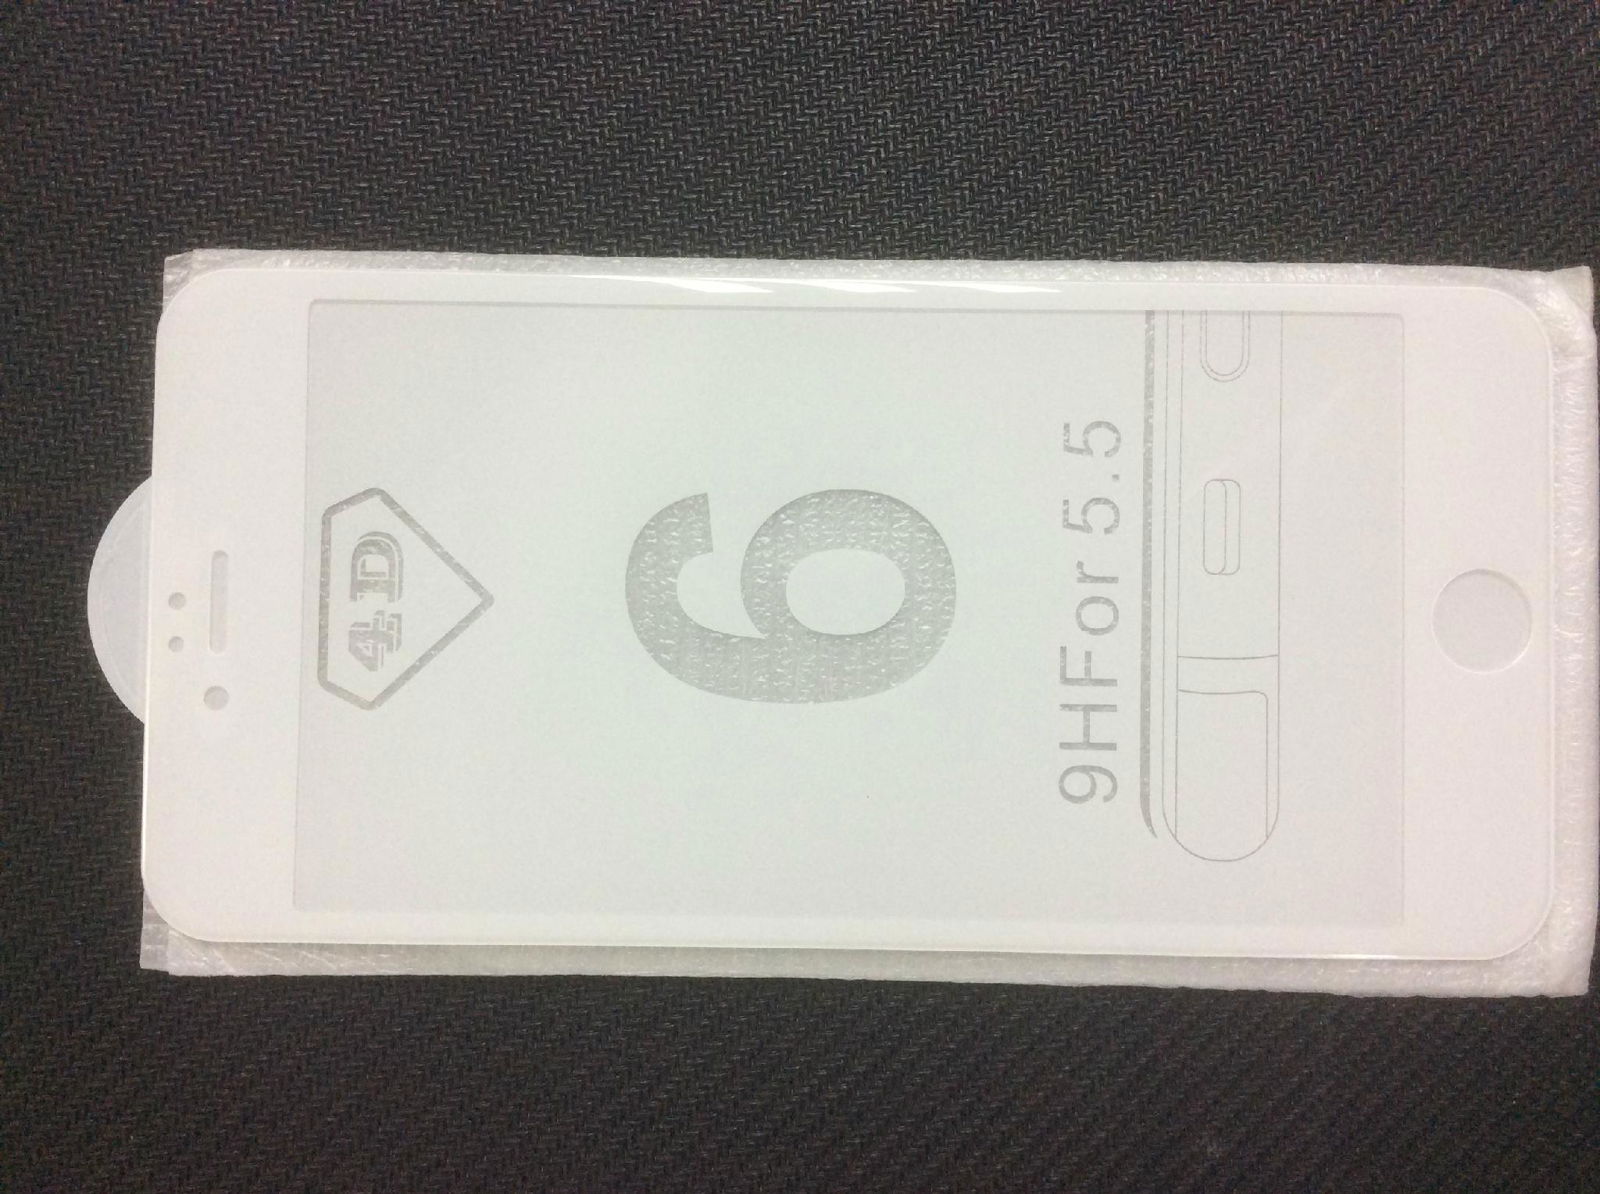 i-phone tempered glass screen protector 5